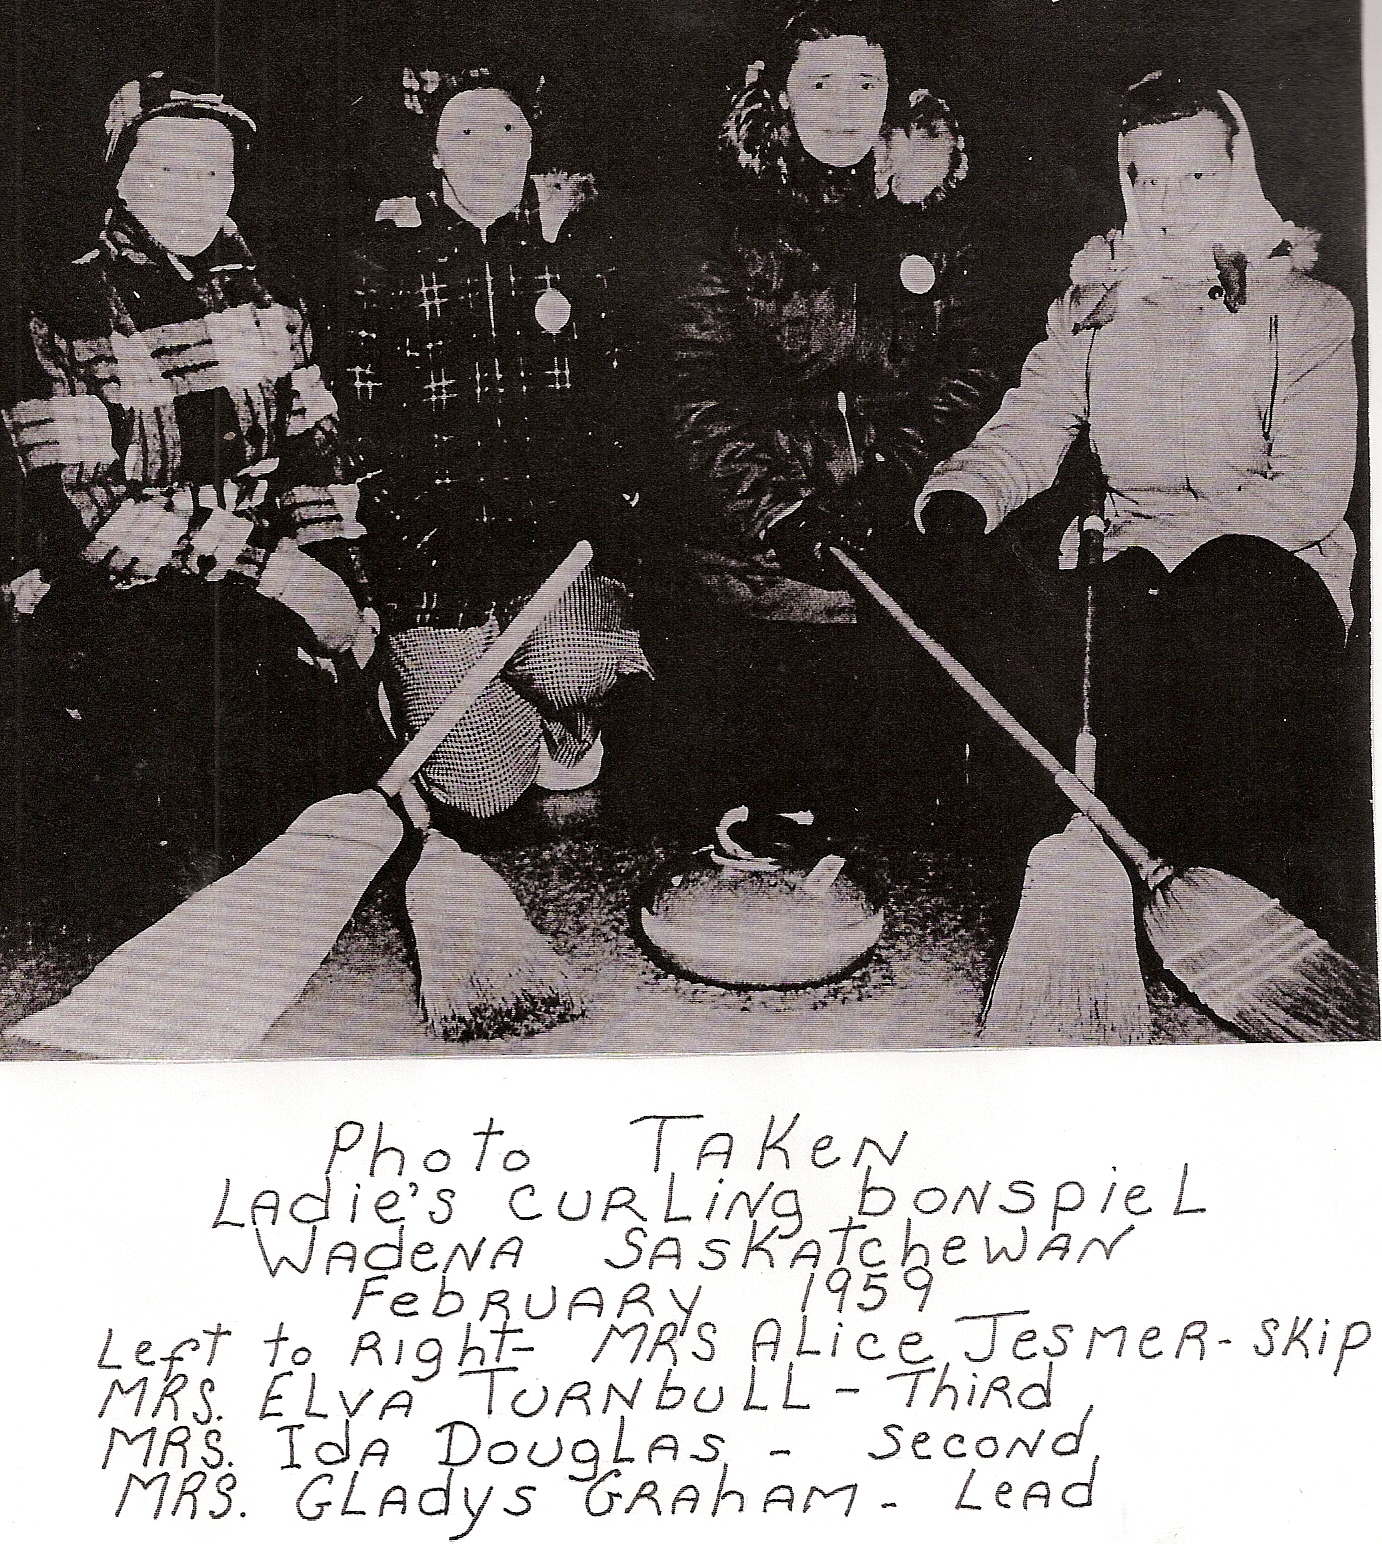 Picture of Alice curling 1959